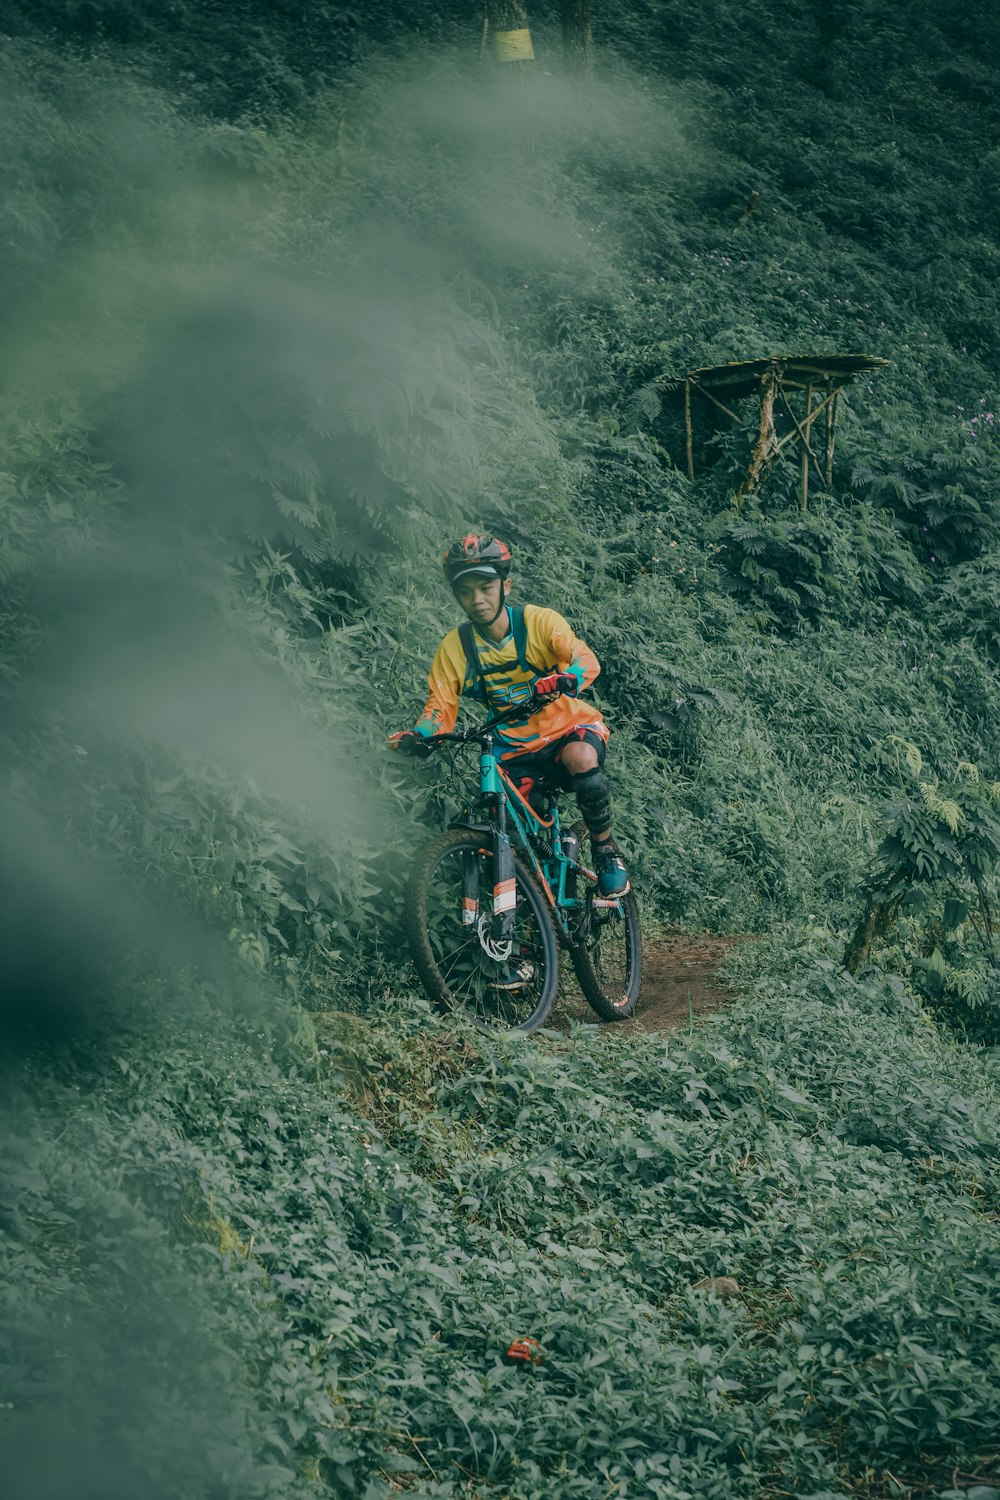 man riding teal full-suspension mountain bike on edge surrounded by green leaf plants